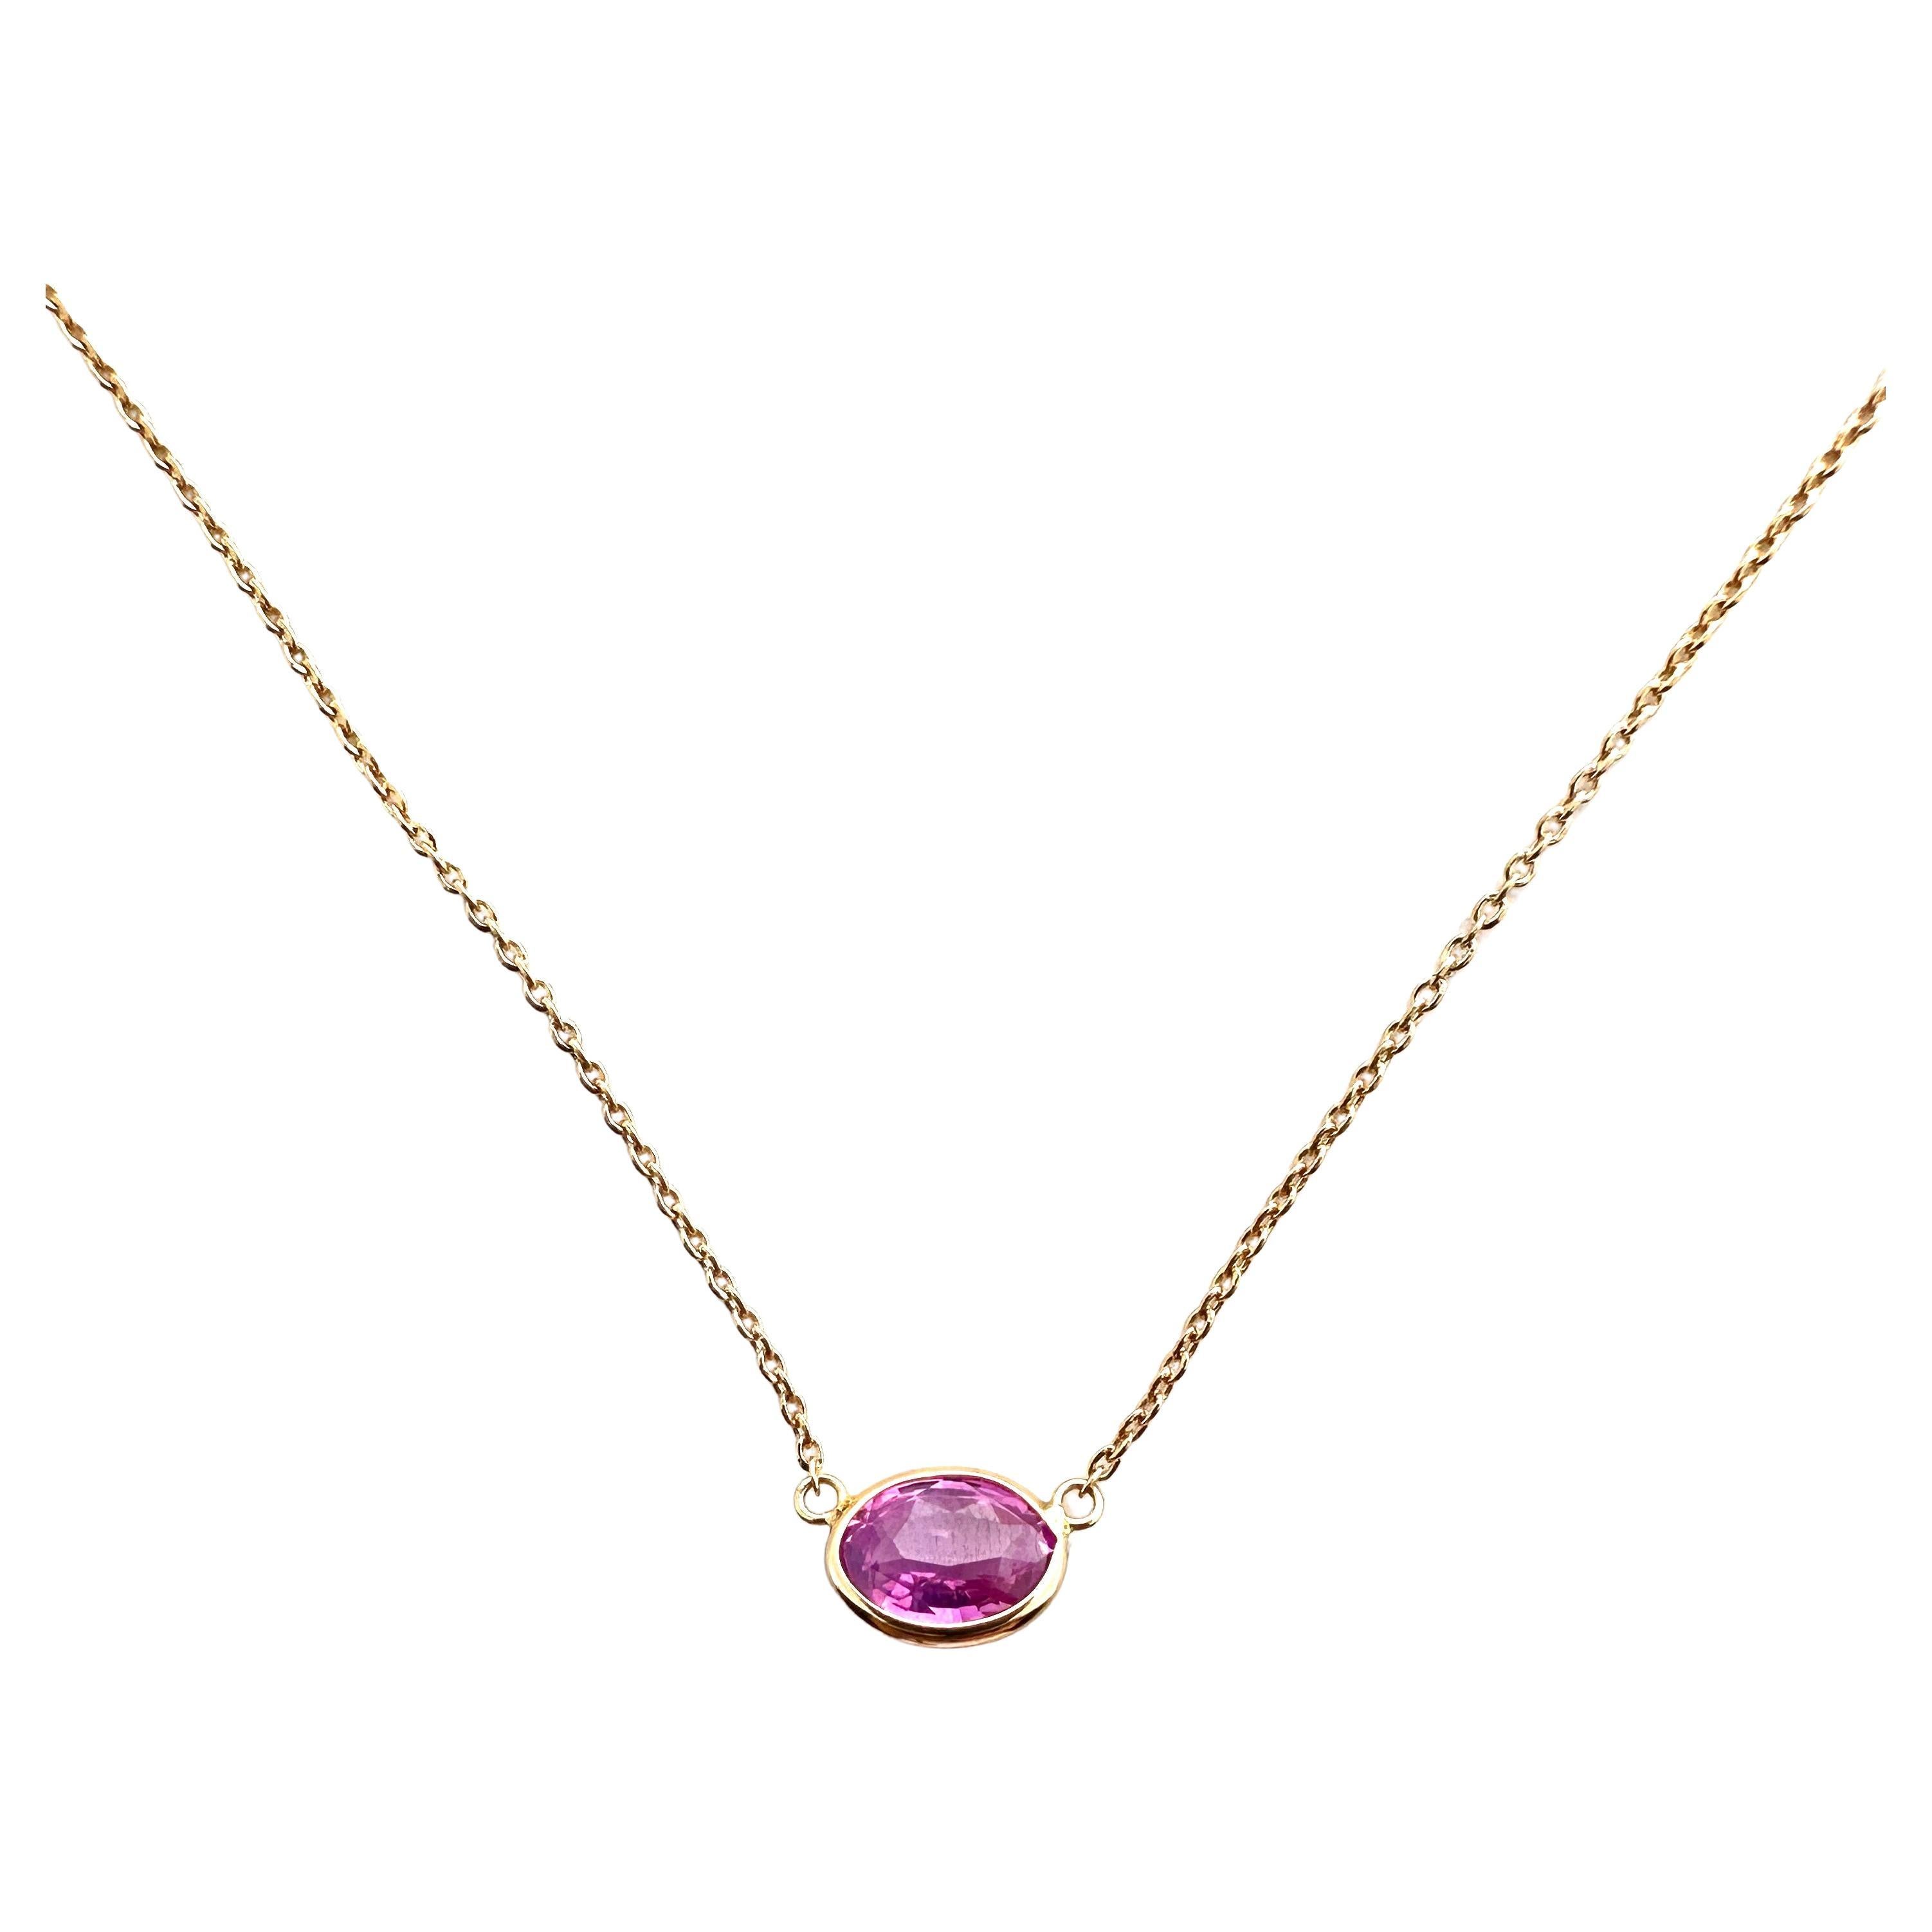 1.74 Ct Poids Certified Pink Sapphire Oval Cut Solitaire Necklace In 14K RG